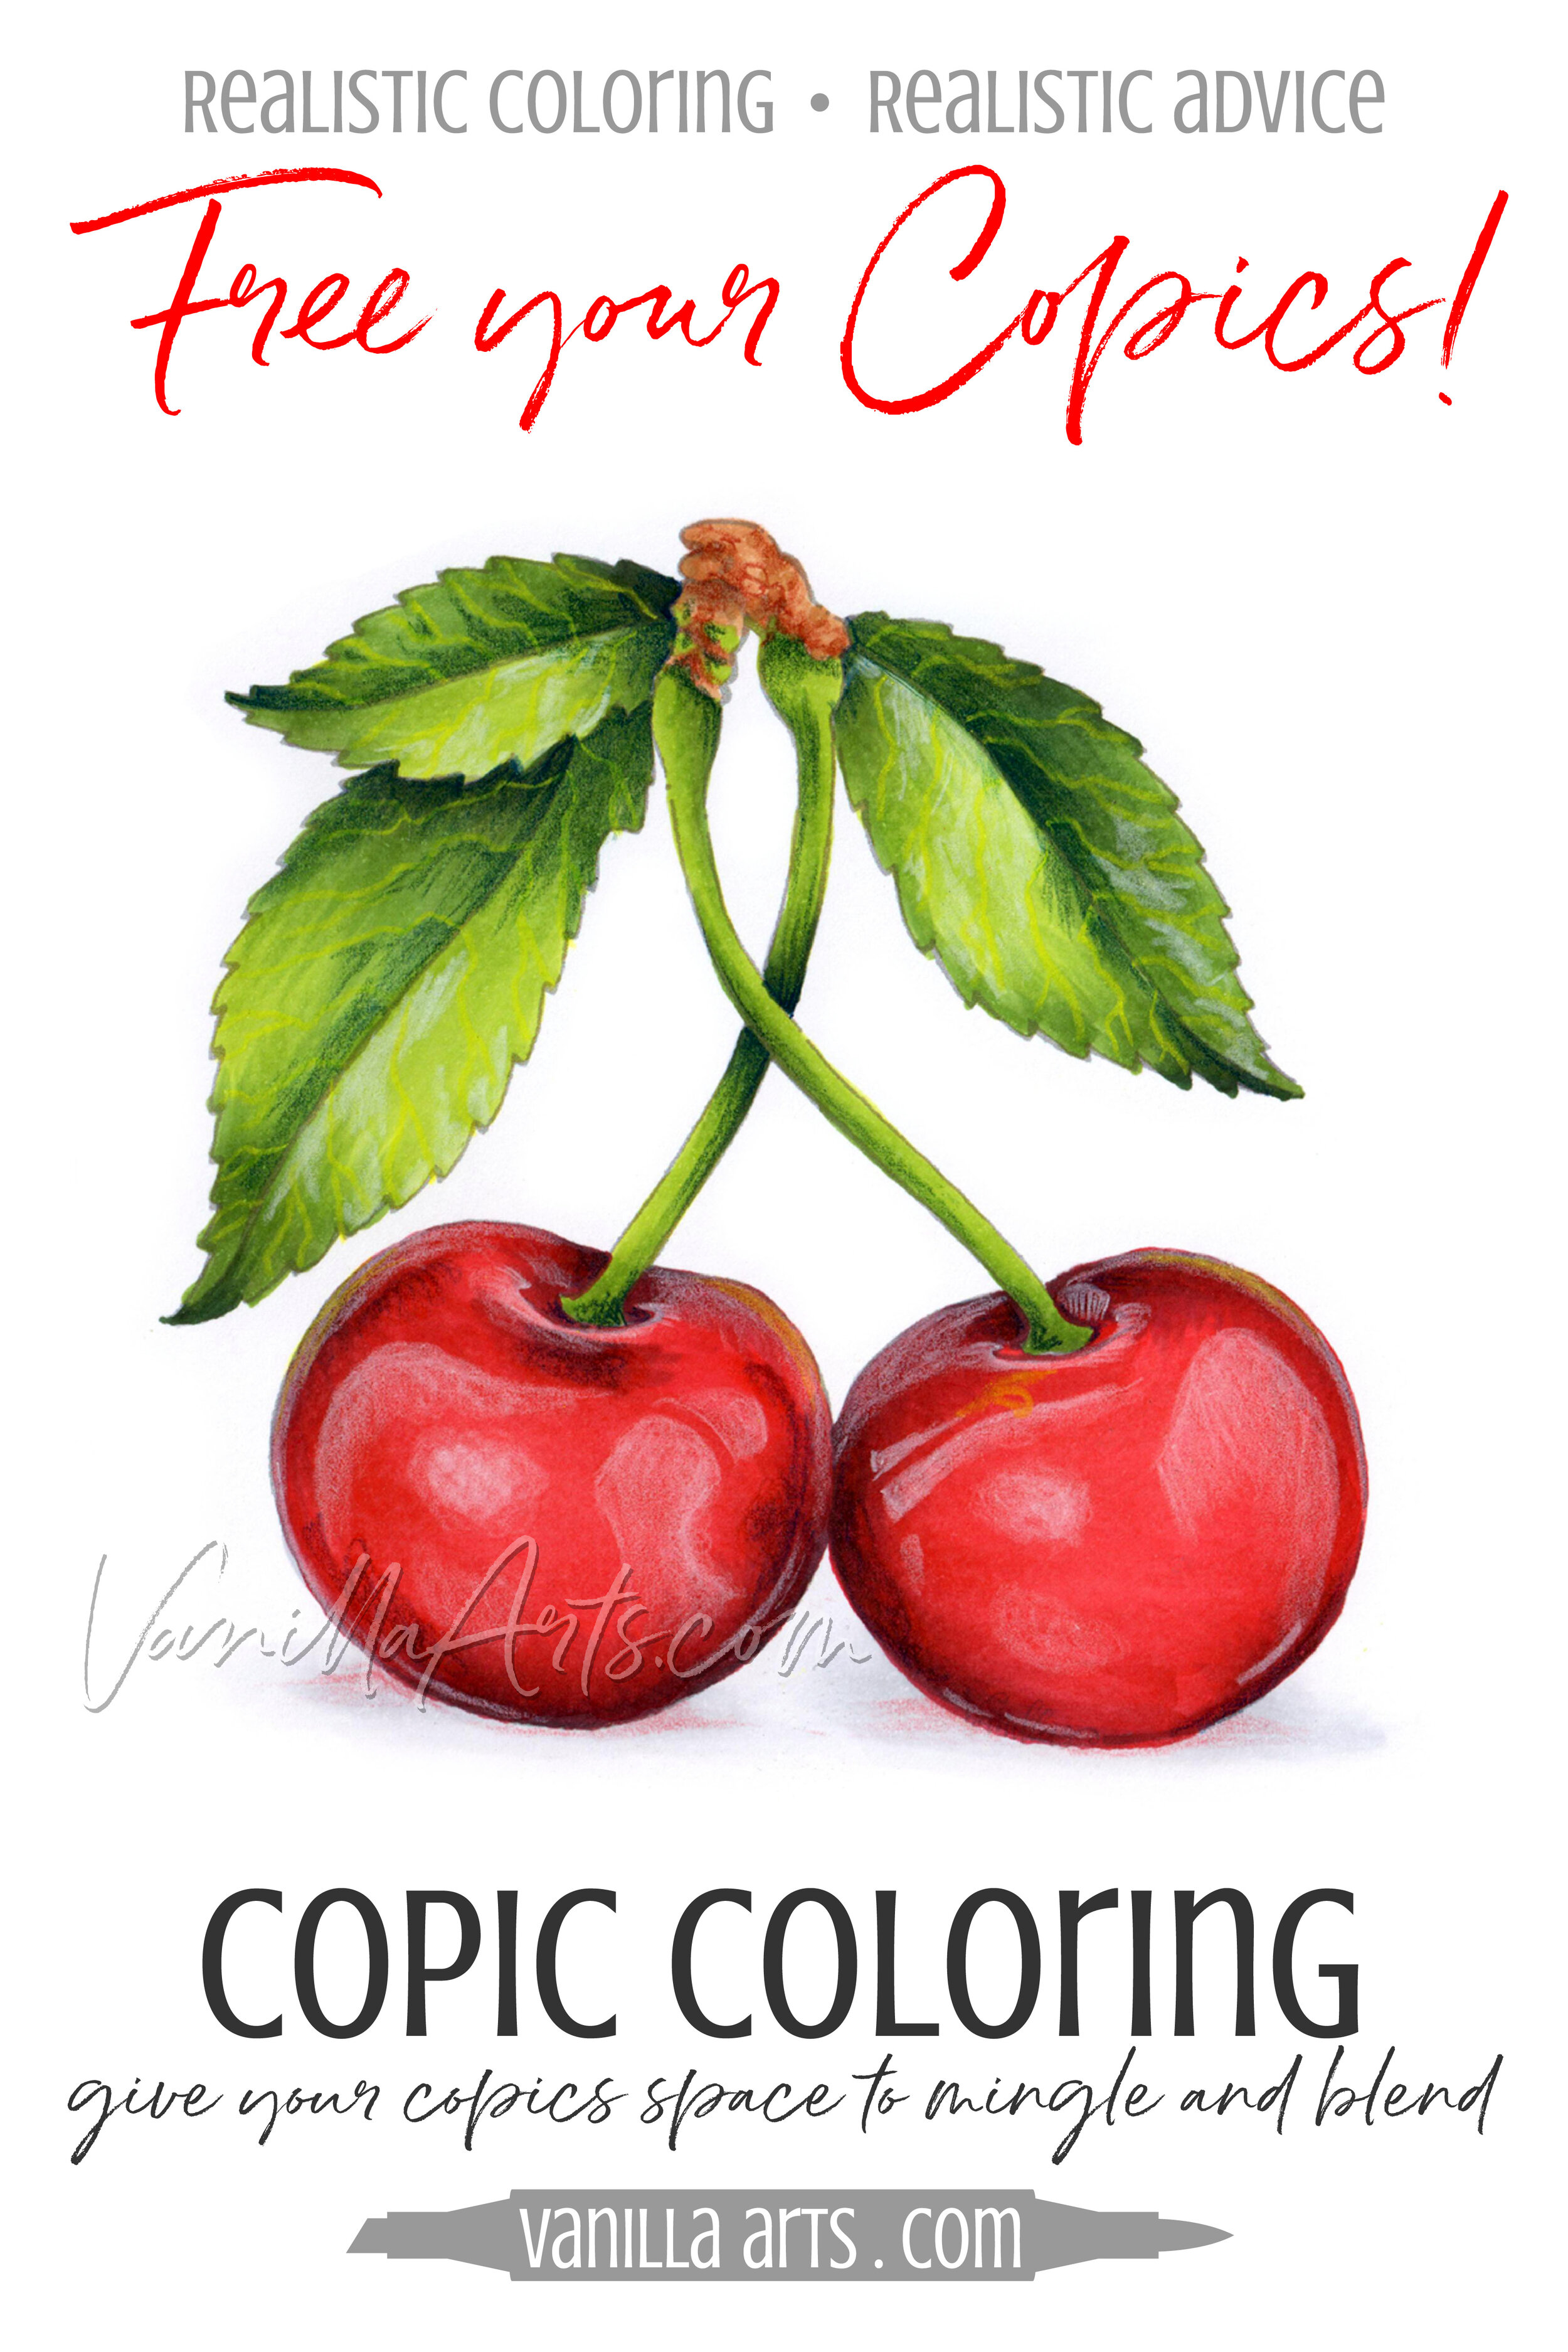 This isn't Paint by Number - Change your Copic Marker Blending